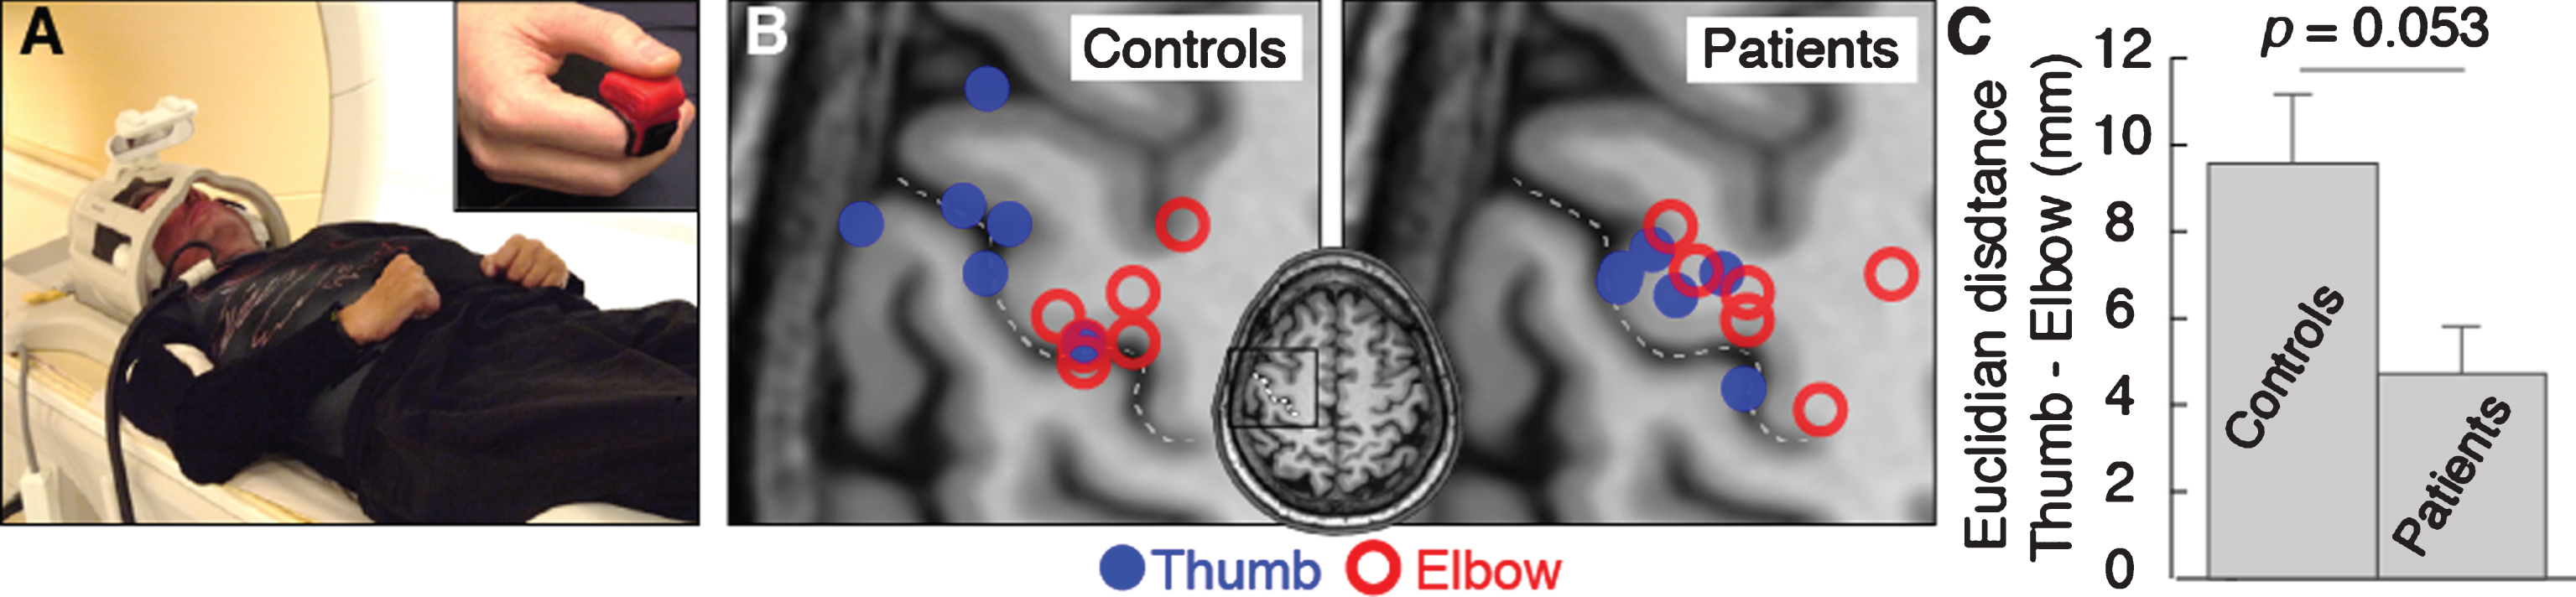 (A) Experimental setup. (B) Activation center of gravity for thumb (blue) and elbow (red) flexion activations in control participants and patients. The central sulcus is indicated by the dotted line. (C) Mean cortical distance between thumb and elbow flexion activation centers of gravity for control participants and patients. Error bars indicate standard error of the mean. Significance of the planned comparison (one-tailed t-test) is shown.